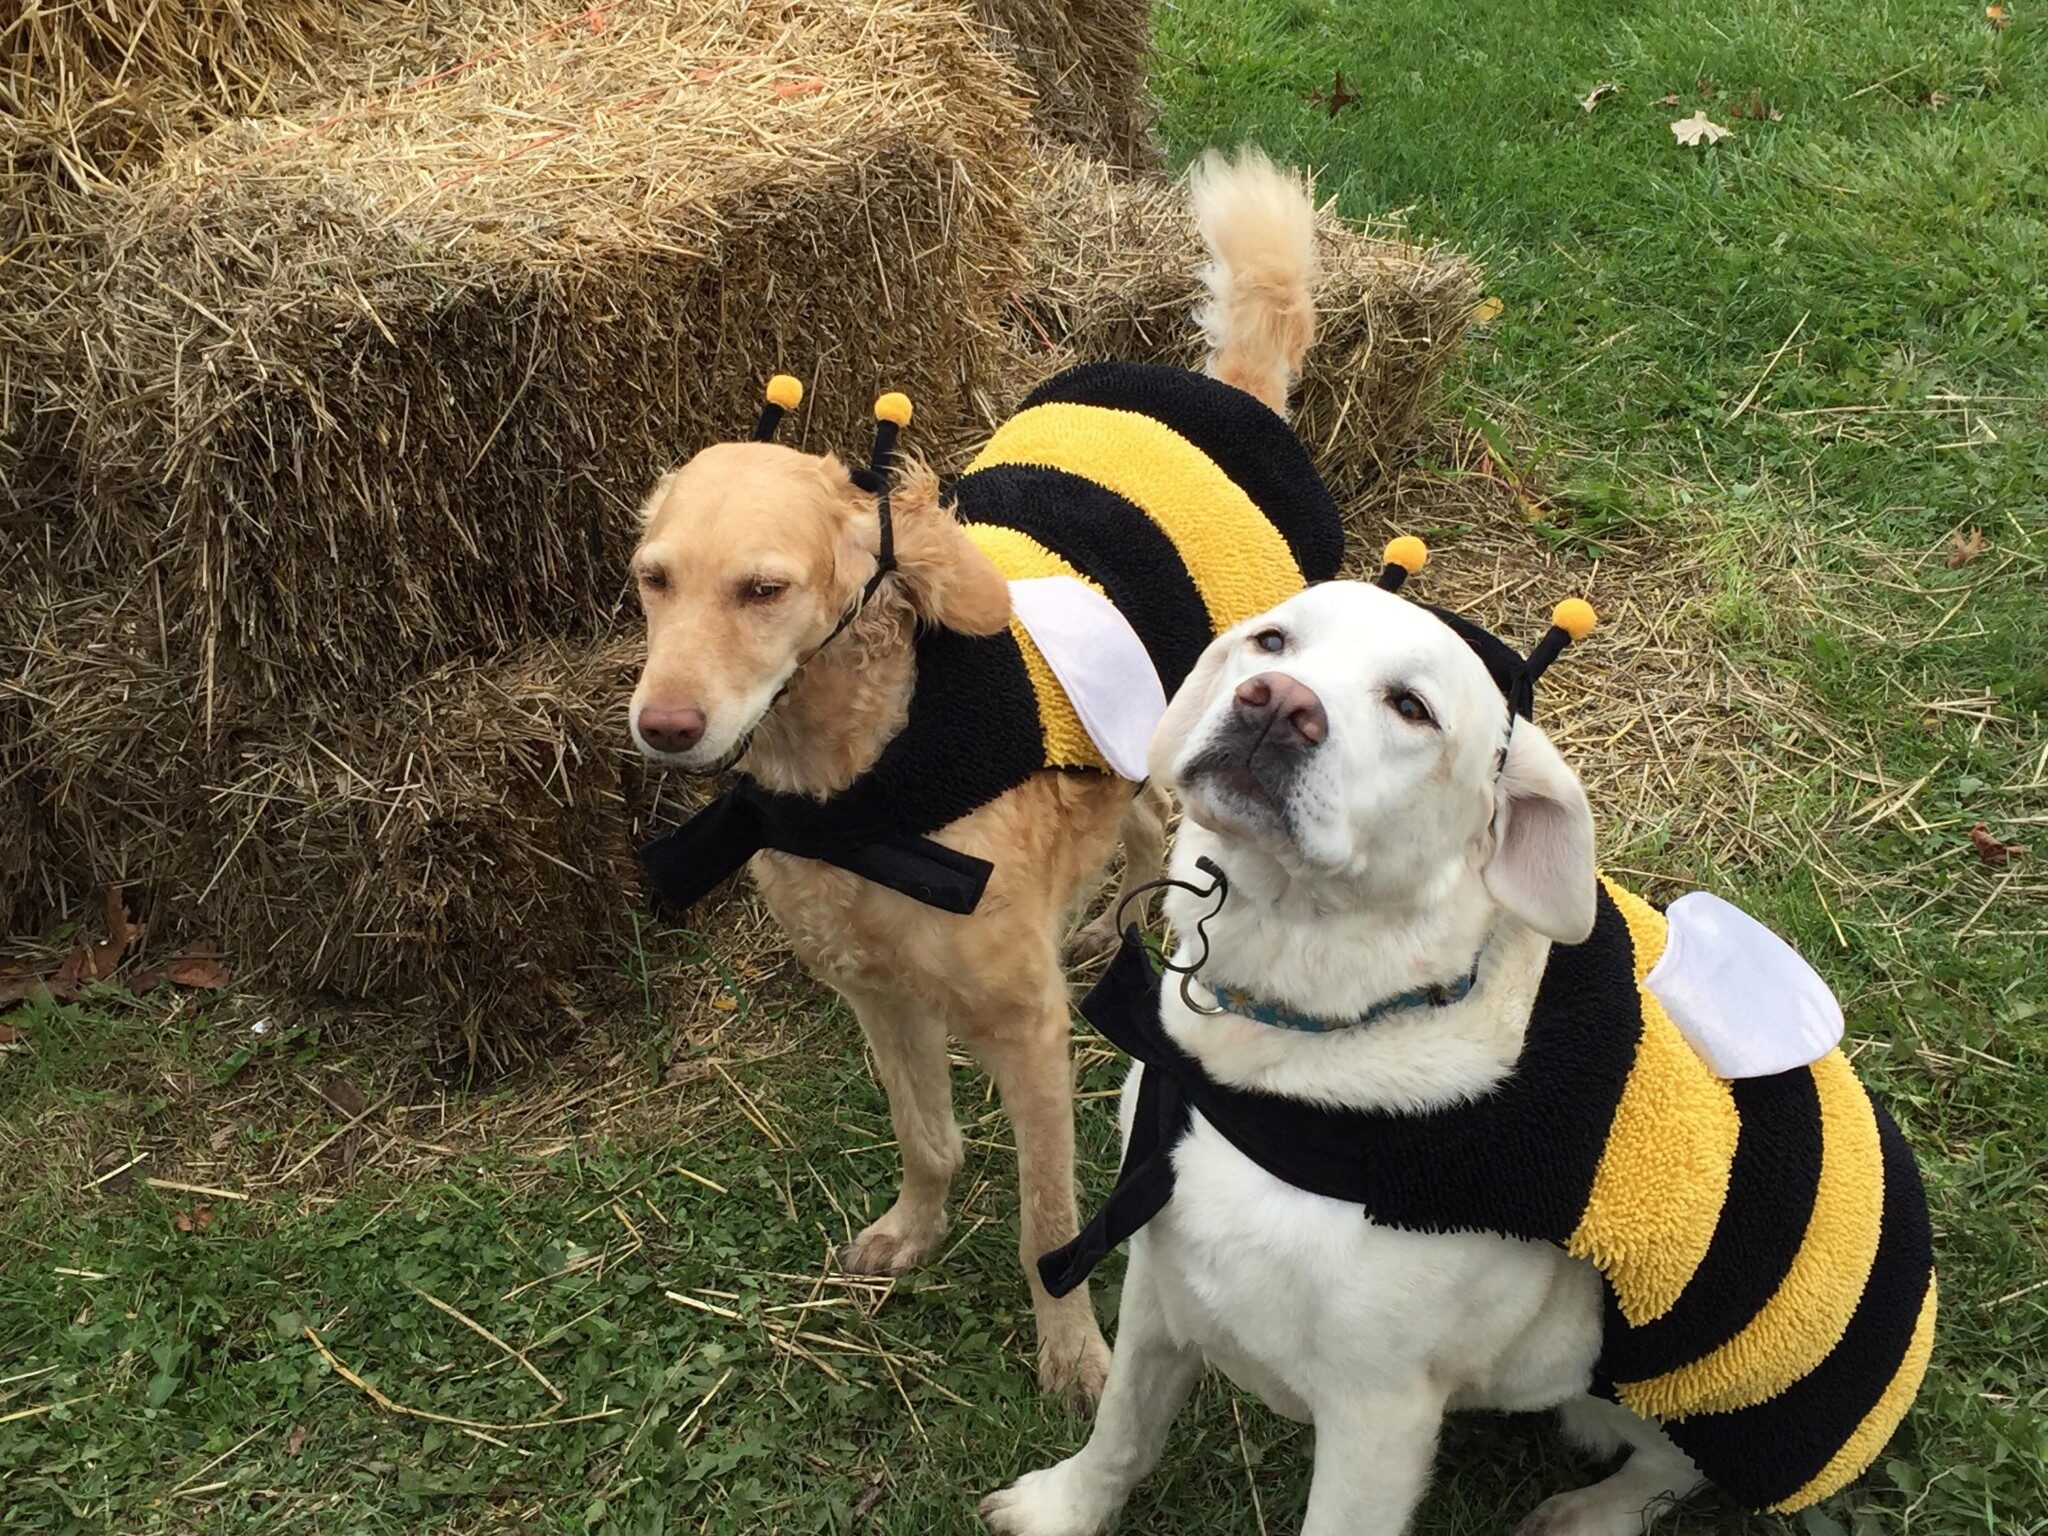 Two Golden retriever dogs wearing bee costumes